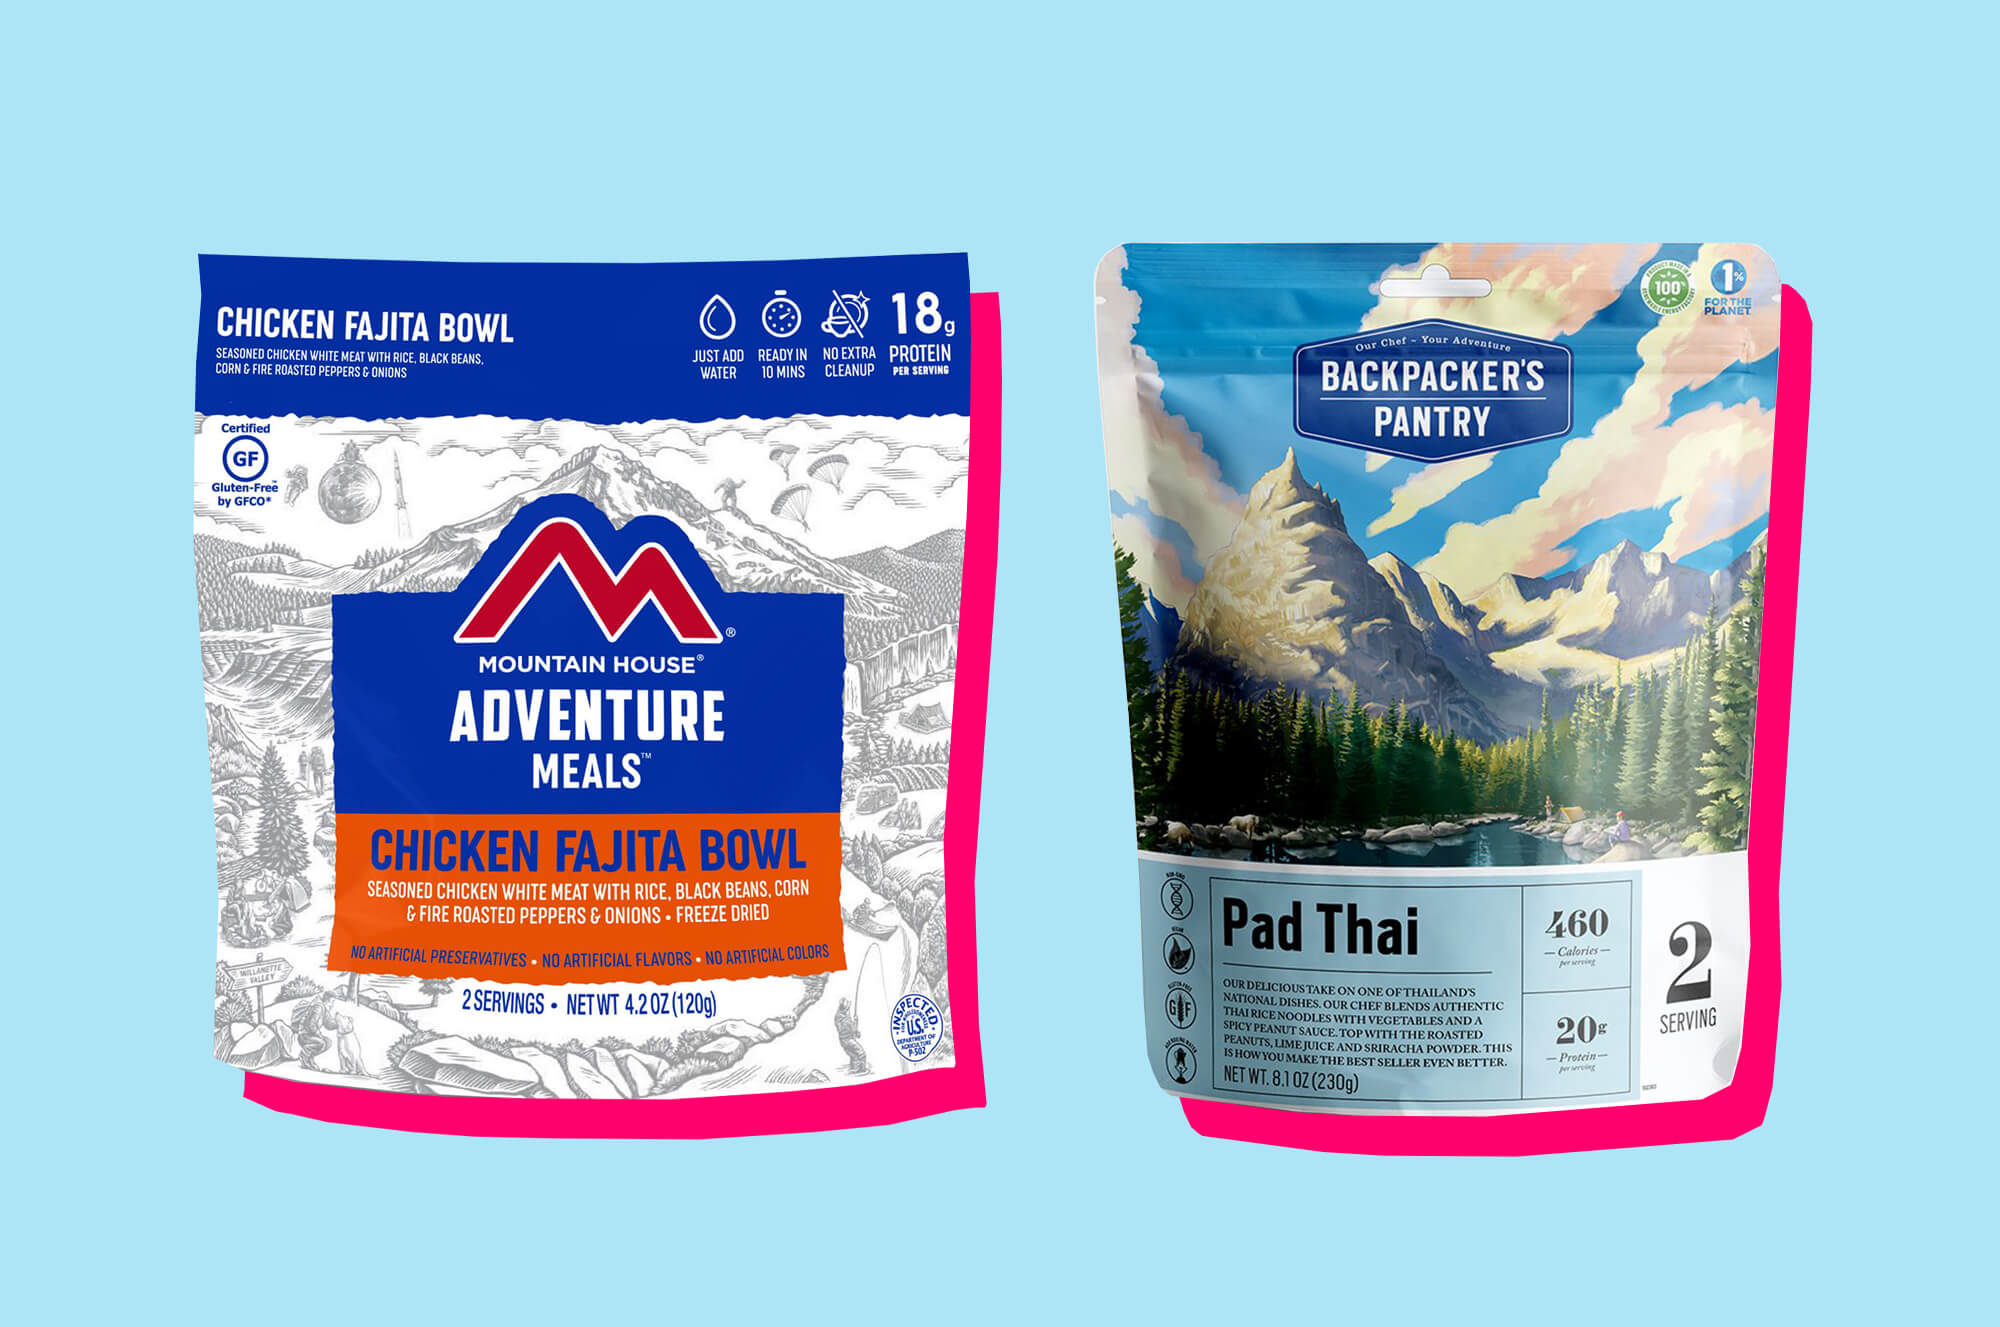 Backpackers Pantry versus Mountain House Meails featured